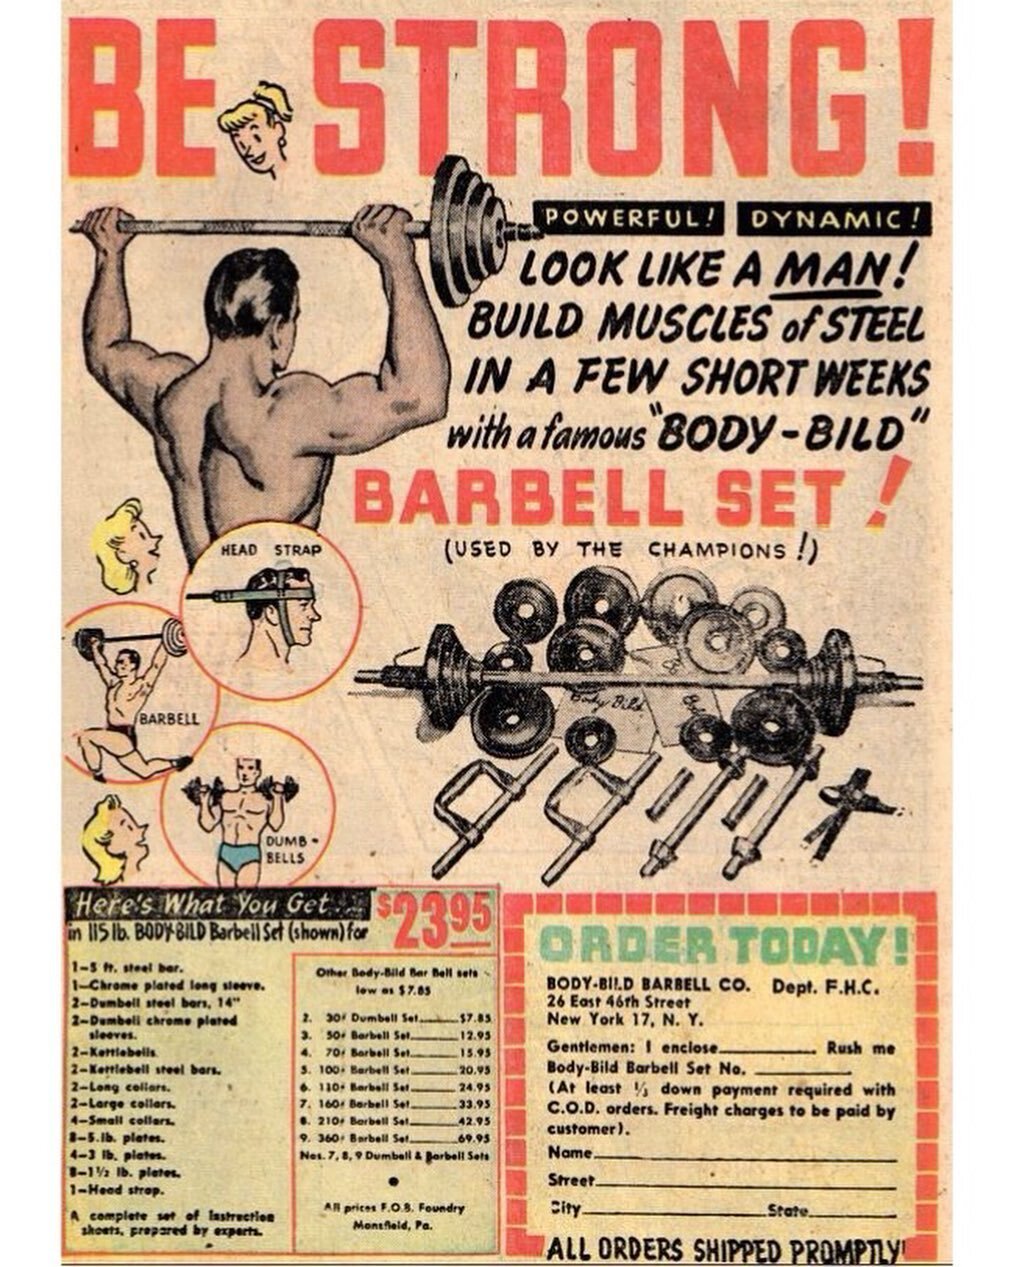 Vintage bodybuilding adverts. 

#strength #odger #fitness #weights #gym #power